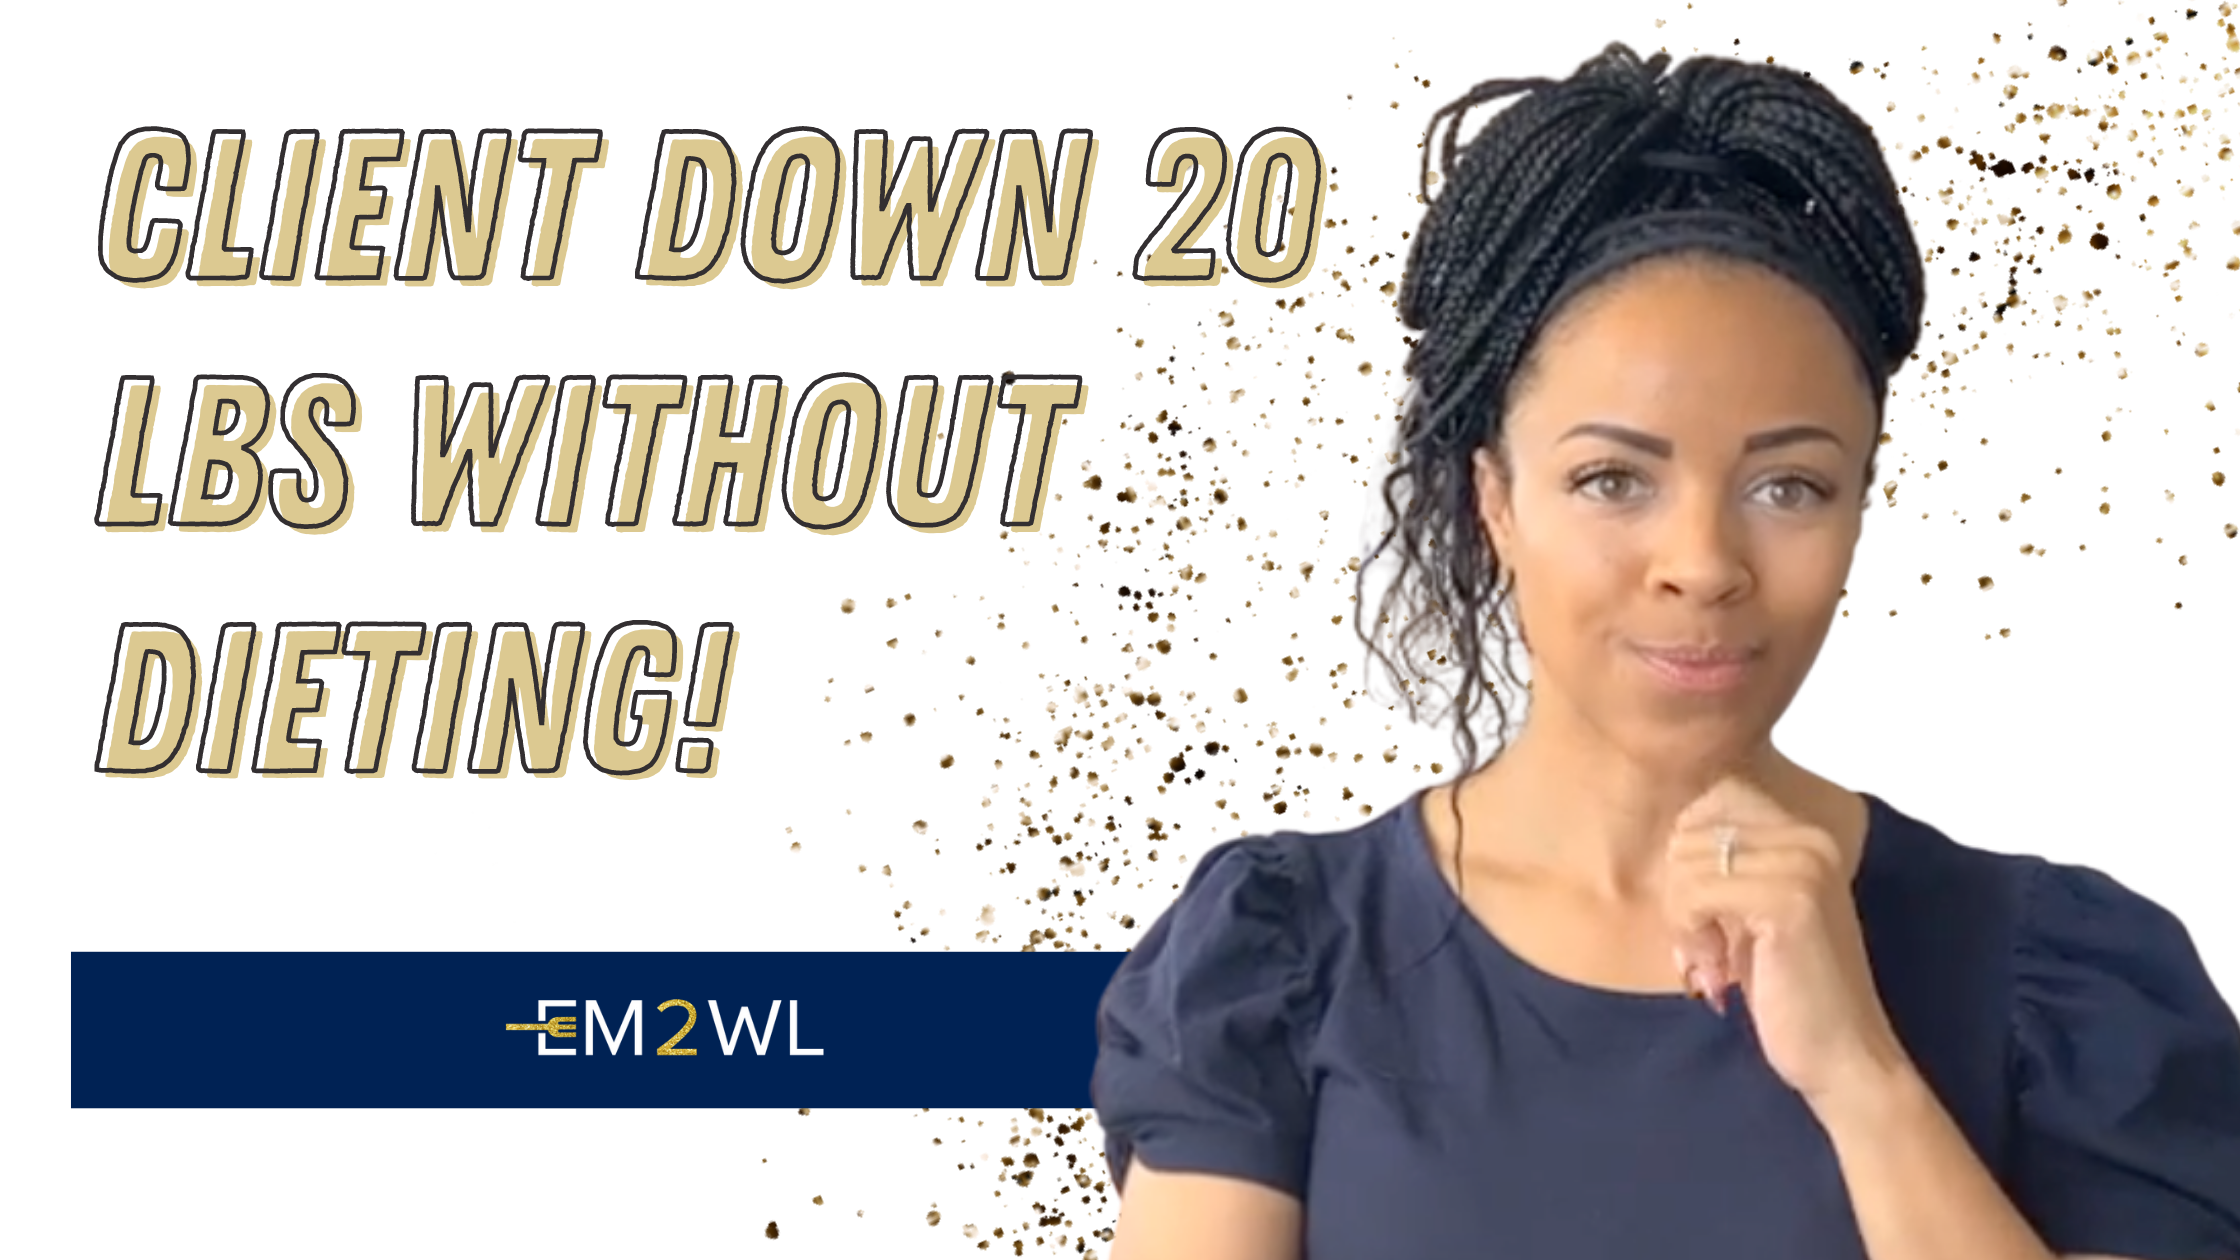 This EM2WL Client is down 20 lbs! Here's how!